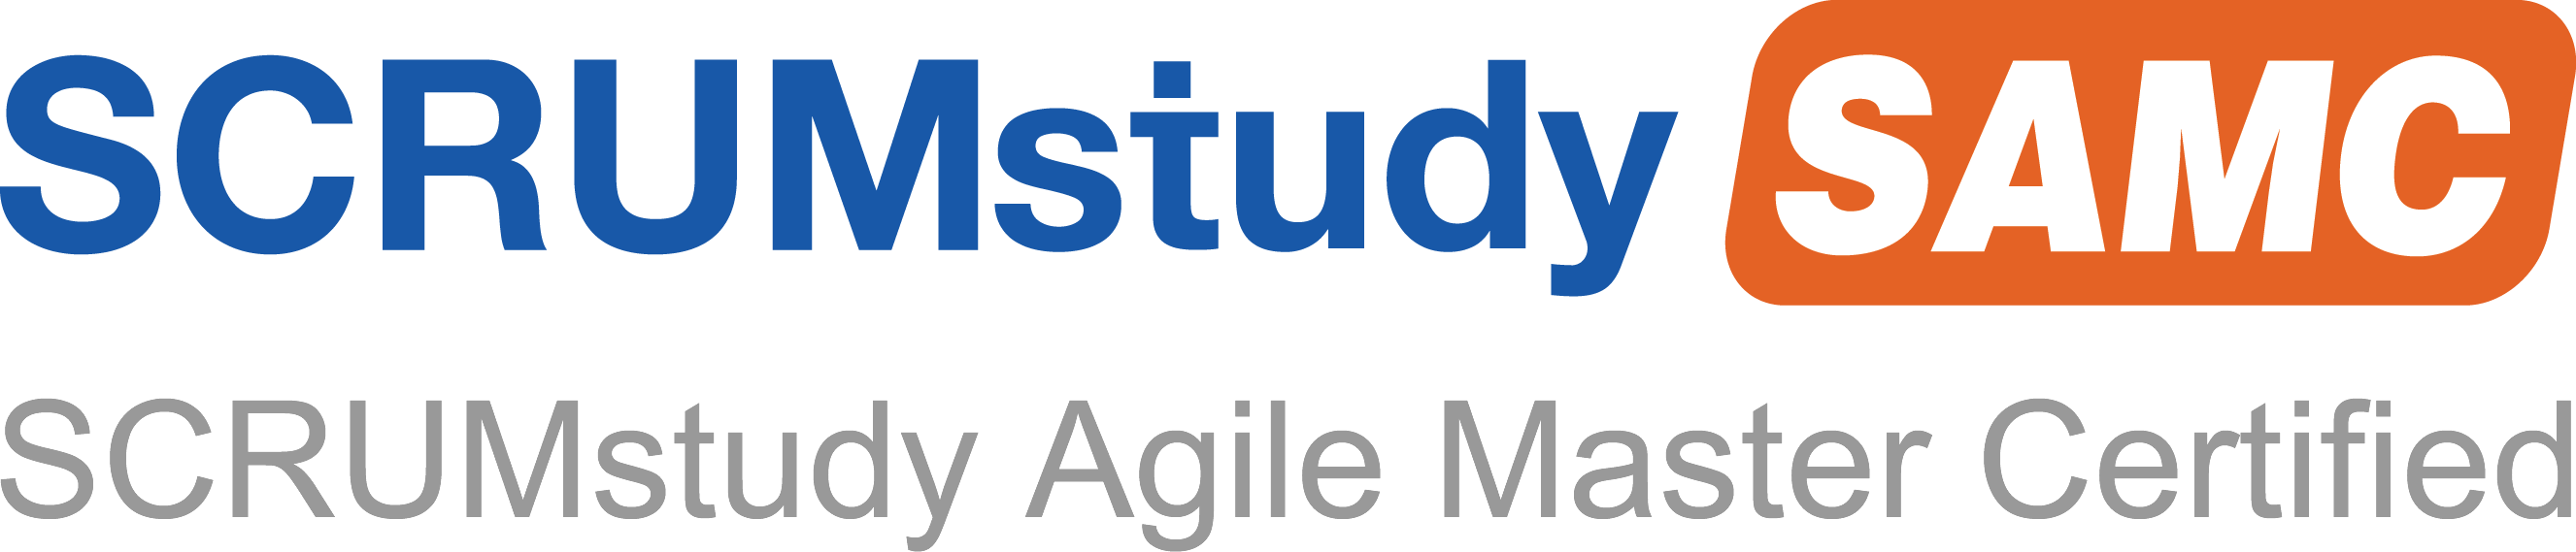 SCRUMstudy Agile Master Certified Logo